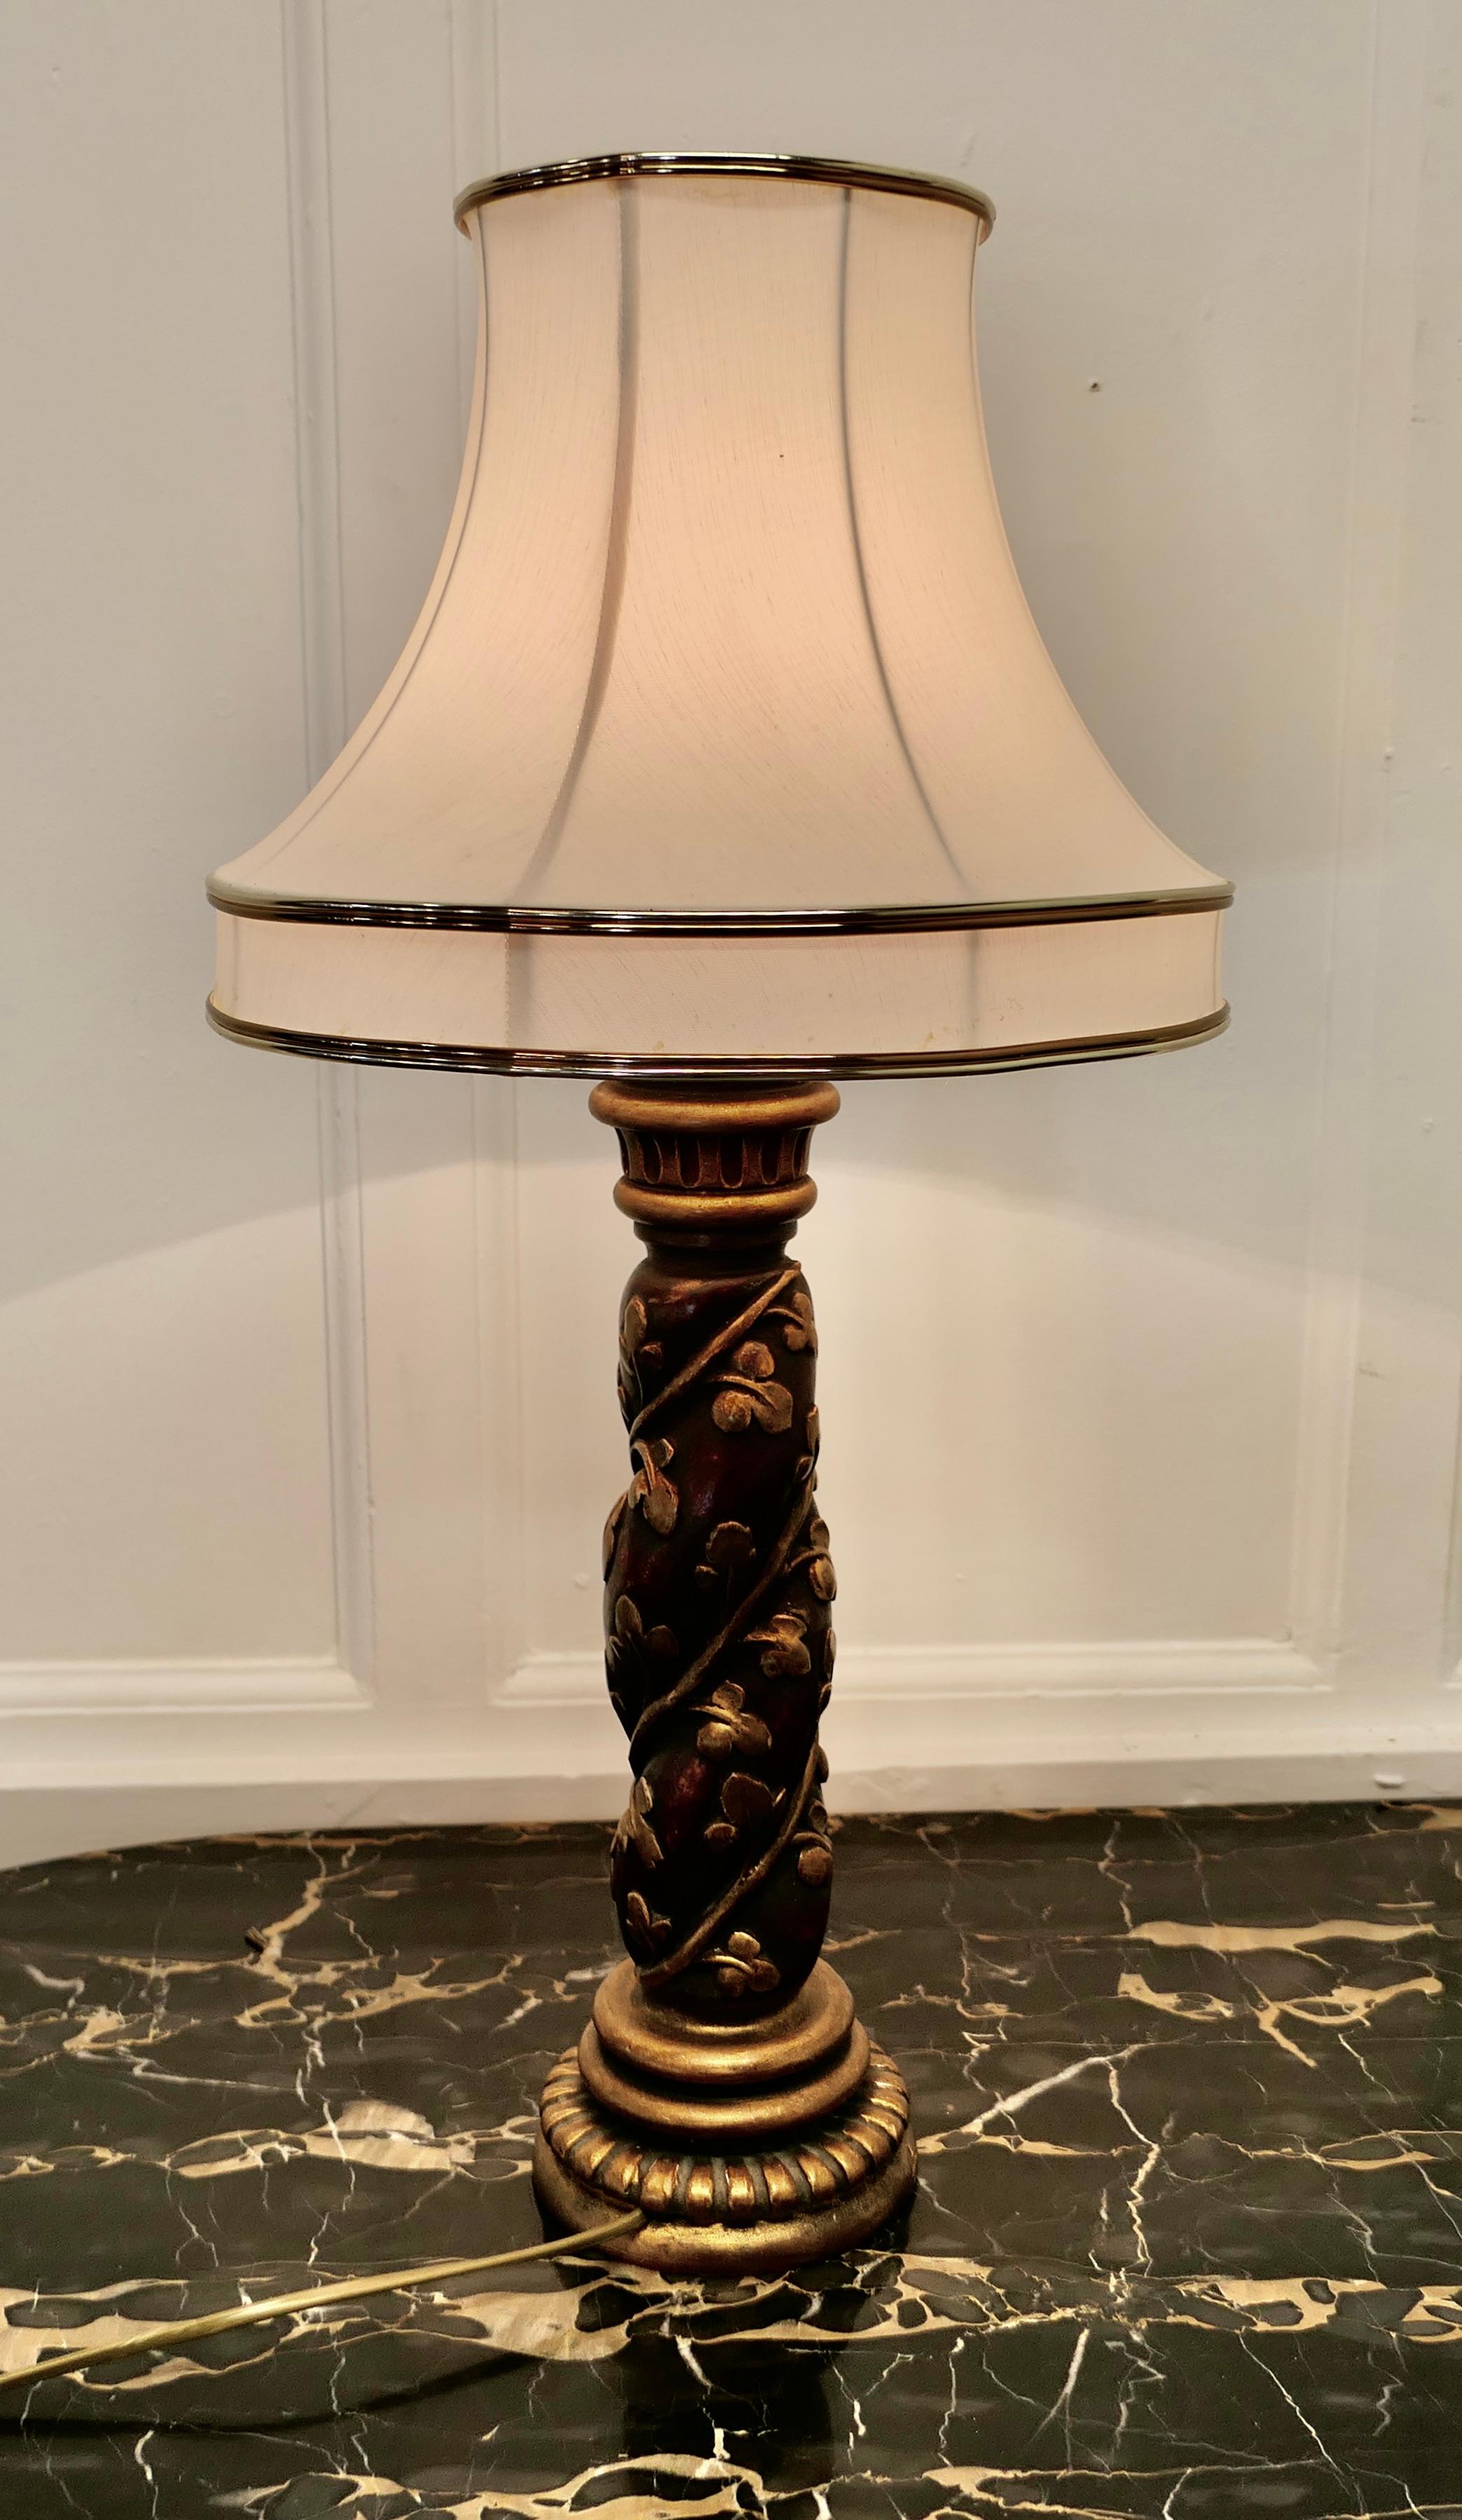 Charming carved and gilt baroque style lamp

This is a very decorative piece, with its delicate lined linen and brass Lamp Shade, it is in burgundy red with carved golden vines twining around
The lamp is in good original condition, the wiring has